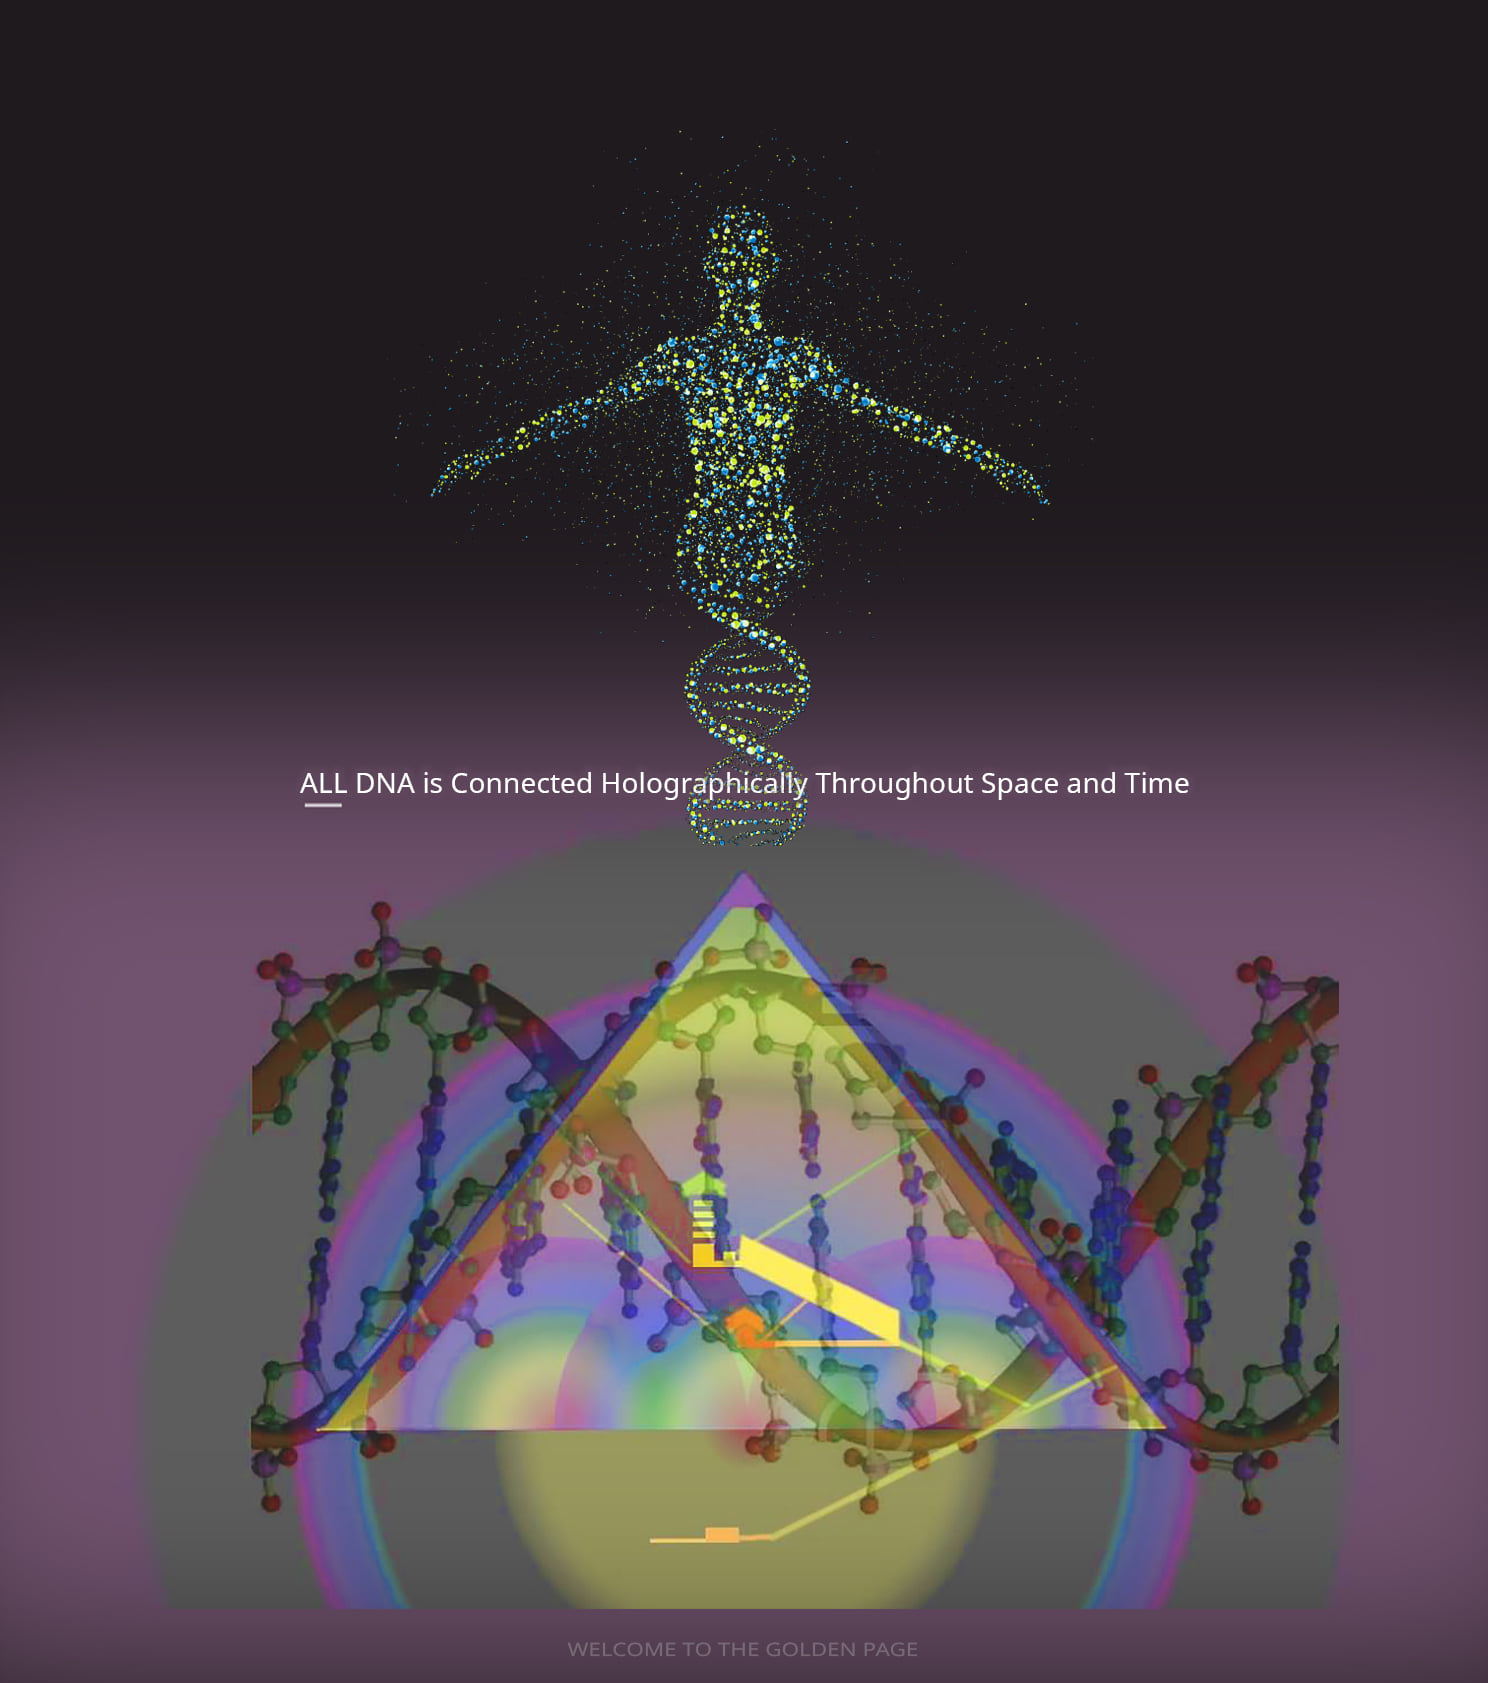 DNA is Connected Holographically